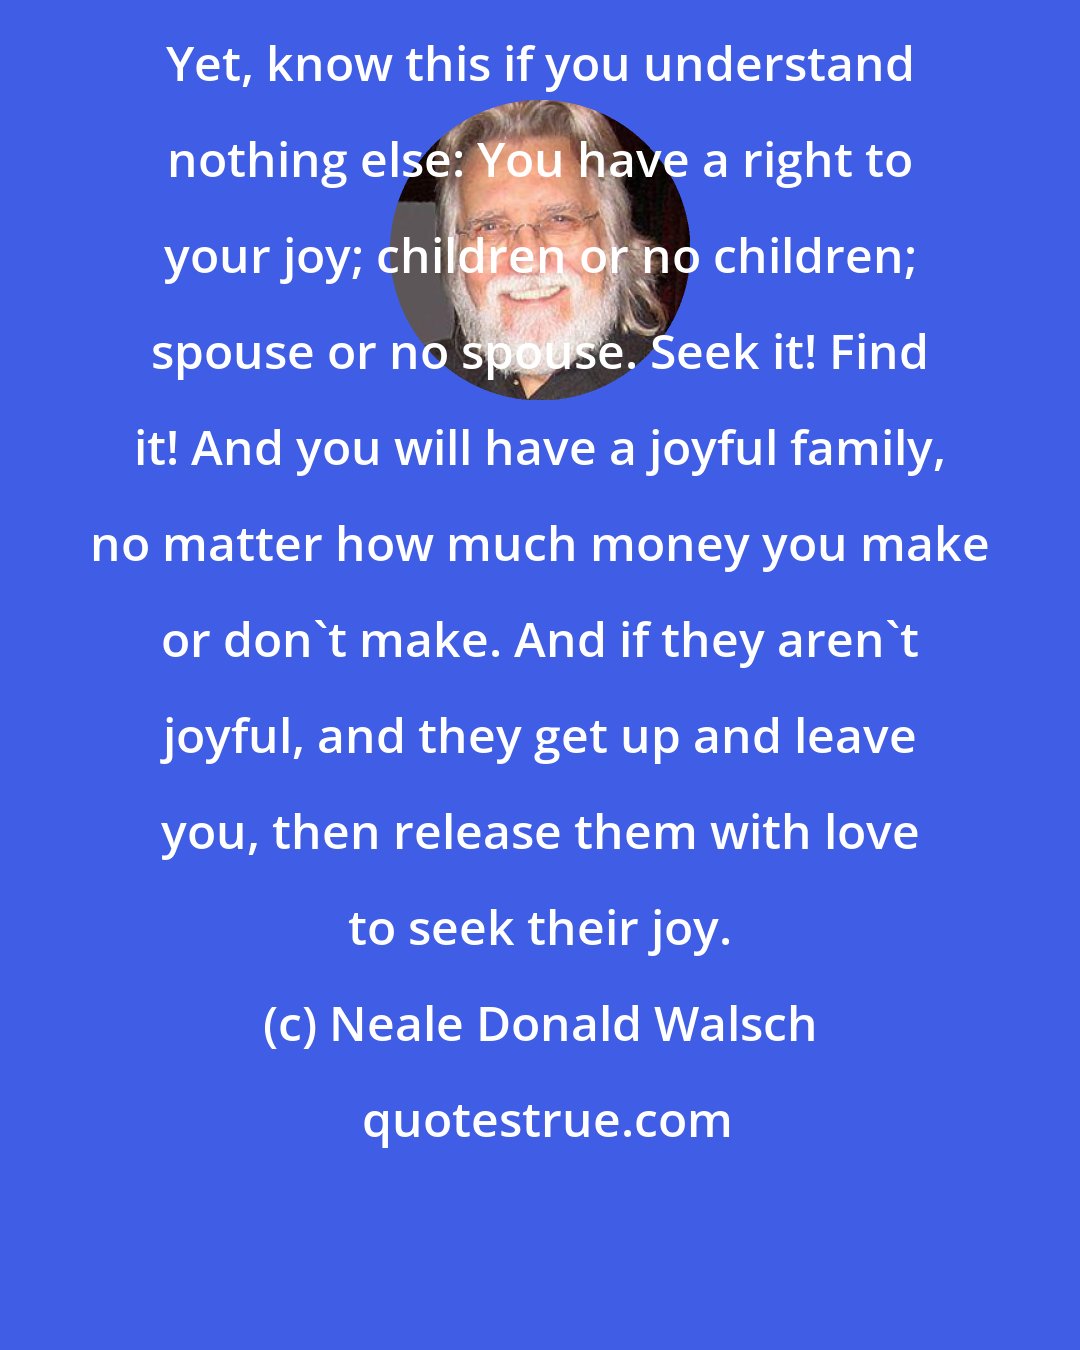 Neale Donald Walsch: Yet, know this if you understand nothing else: You have a right to your joy; children or no children; spouse or no spouse. Seek it! Find it! And you will have a joyful family, no matter how much money you make or don't make. And if they aren't joyful, and they get up and leave you, then release them with love to seek their joy.